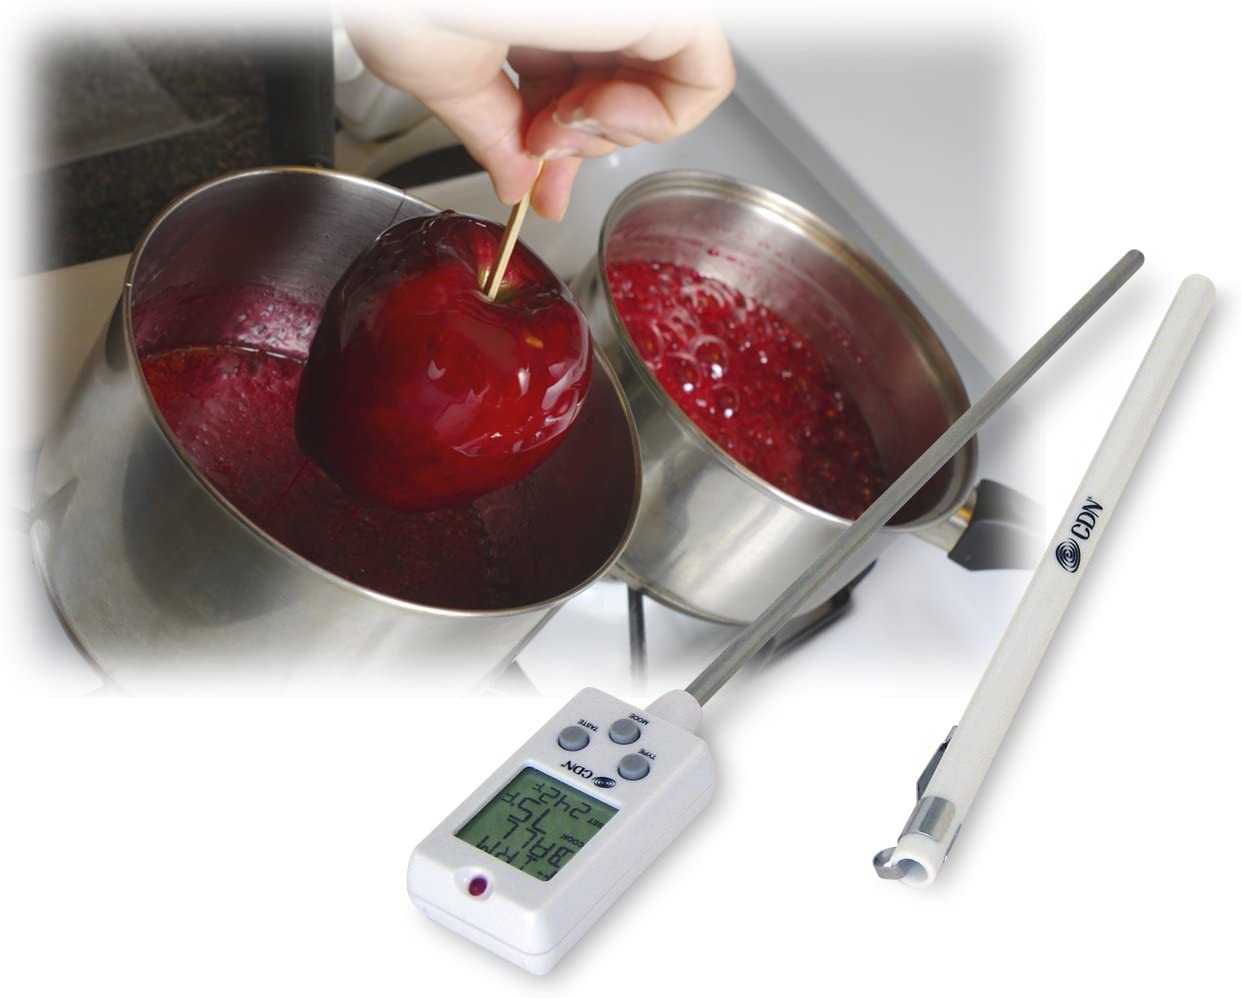 CDN DTC450 Digital Candy/Deep Fry/Pre-Programmed & Programmable Thermometer, White, 10.4